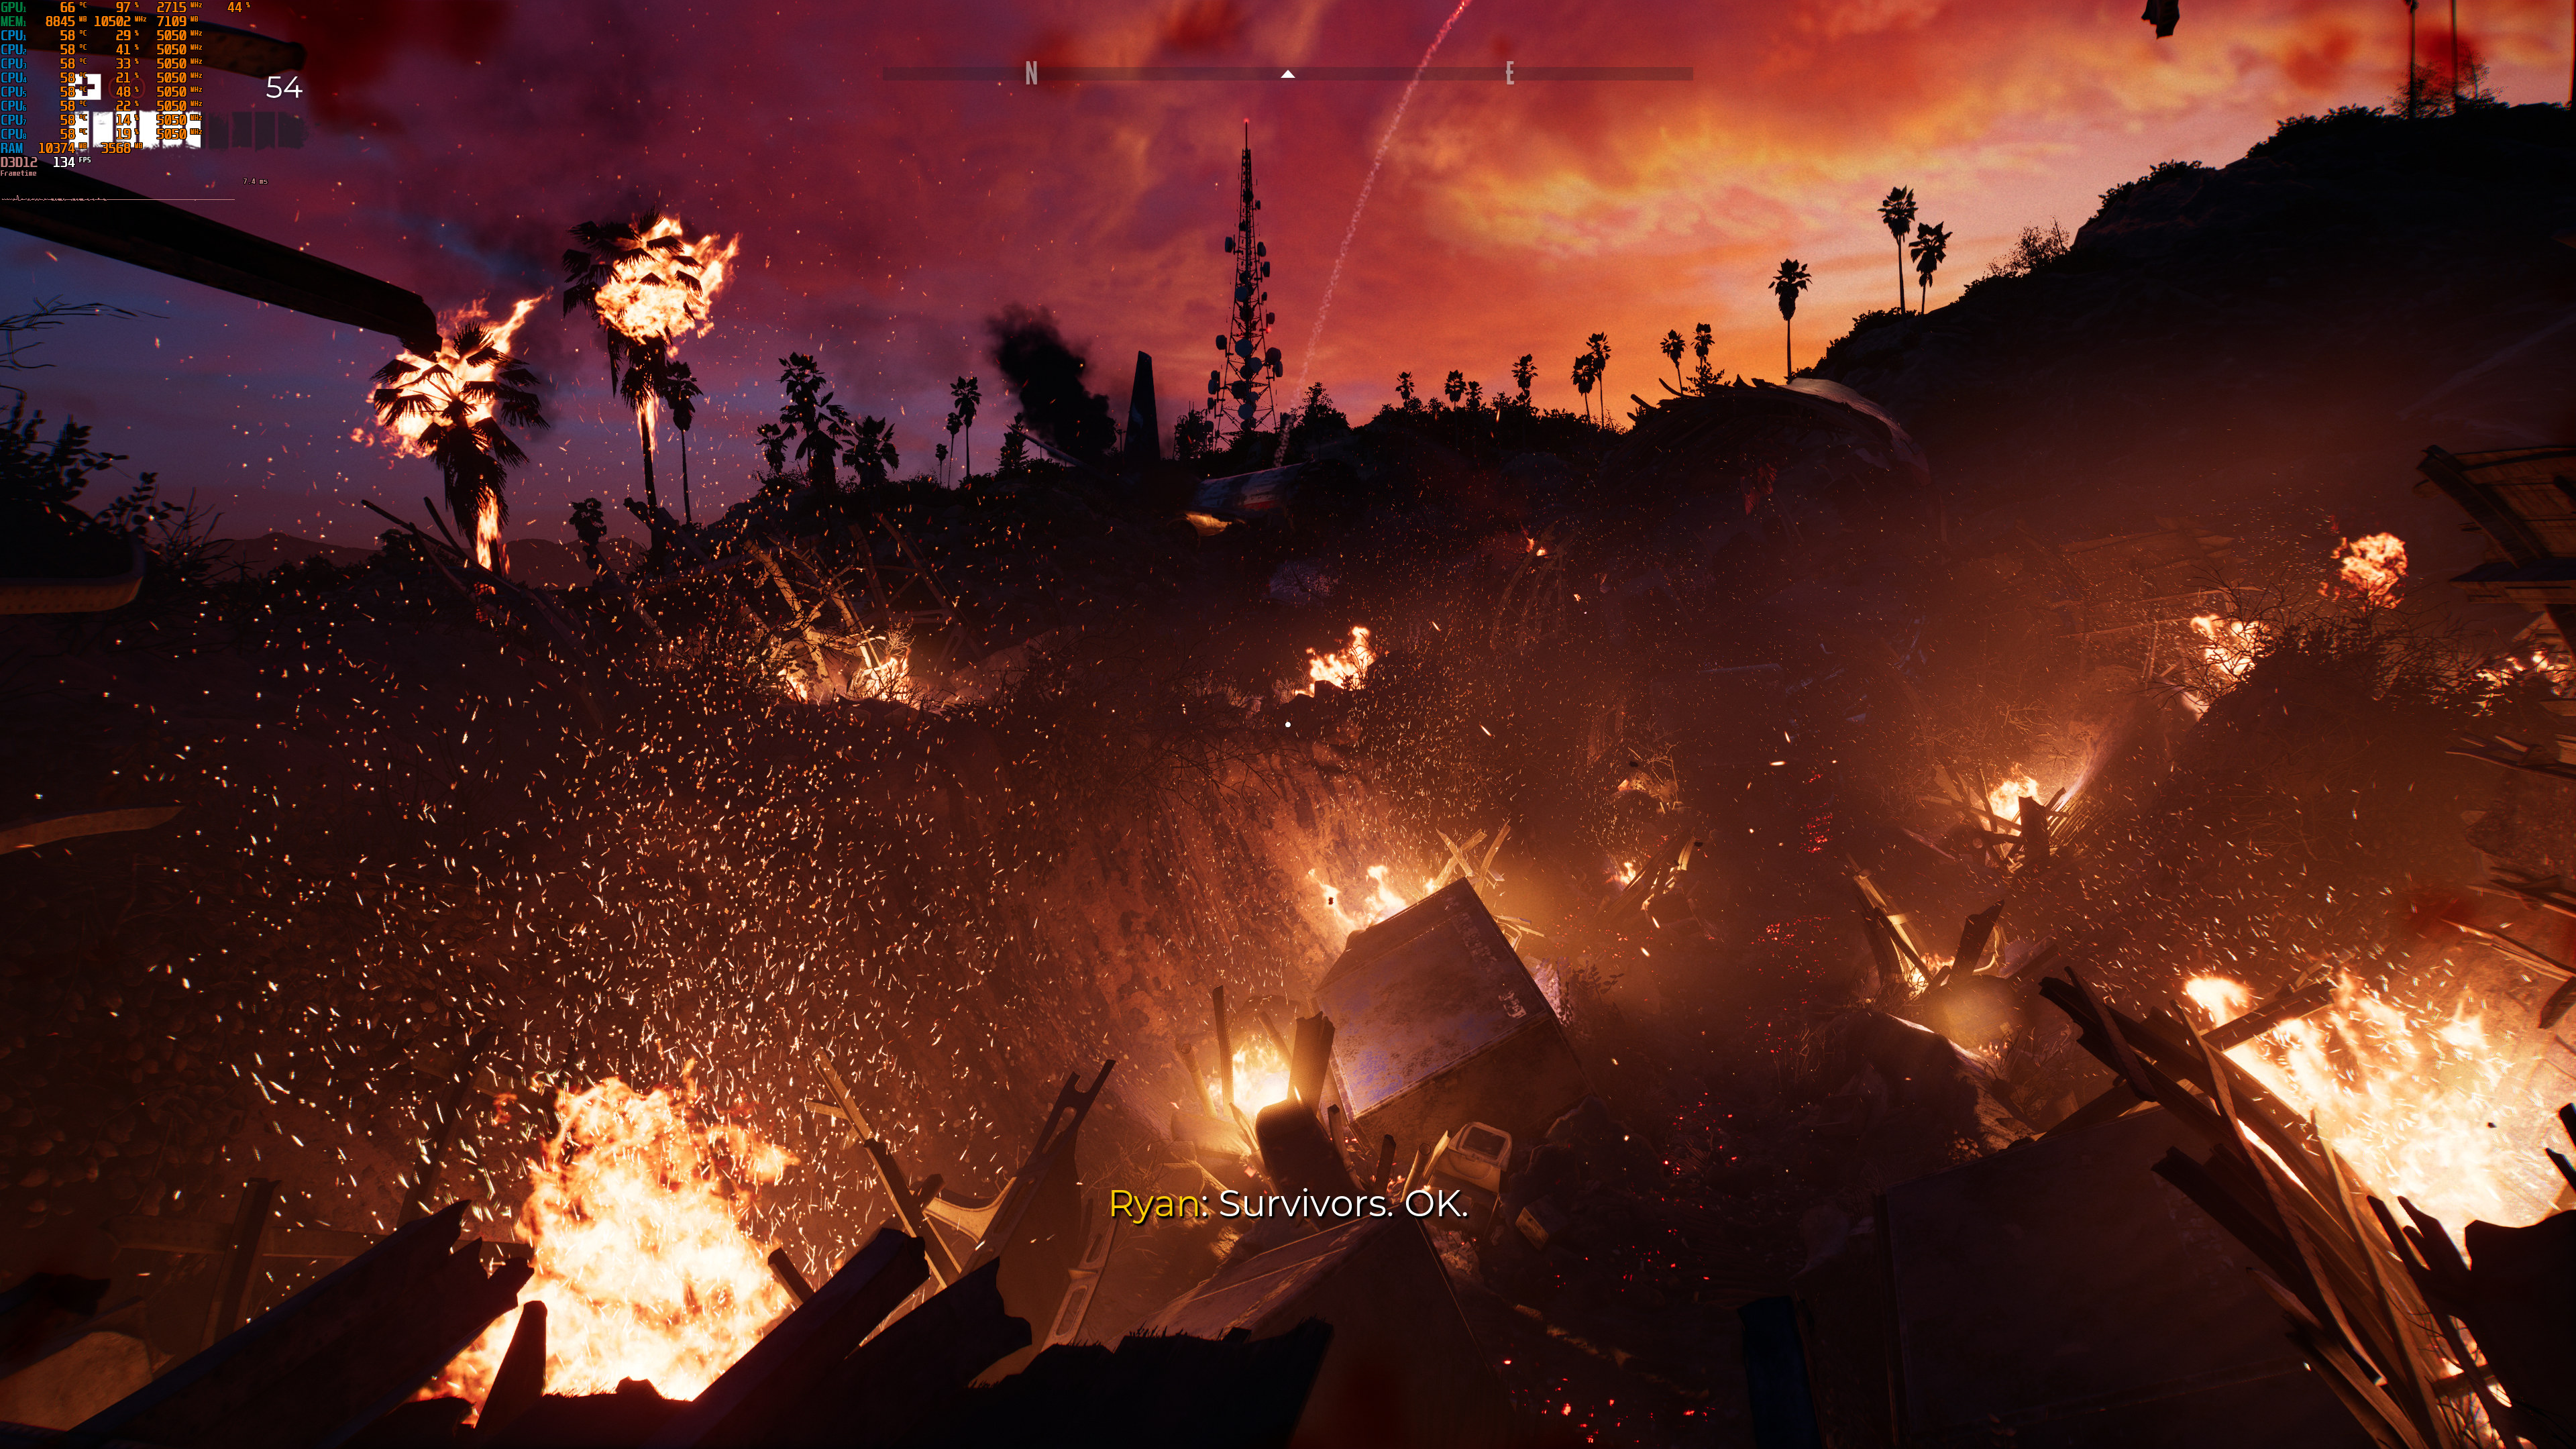 I'm as shocked as you, but Dead Island 2 is one of the best-looking games  I've played this year